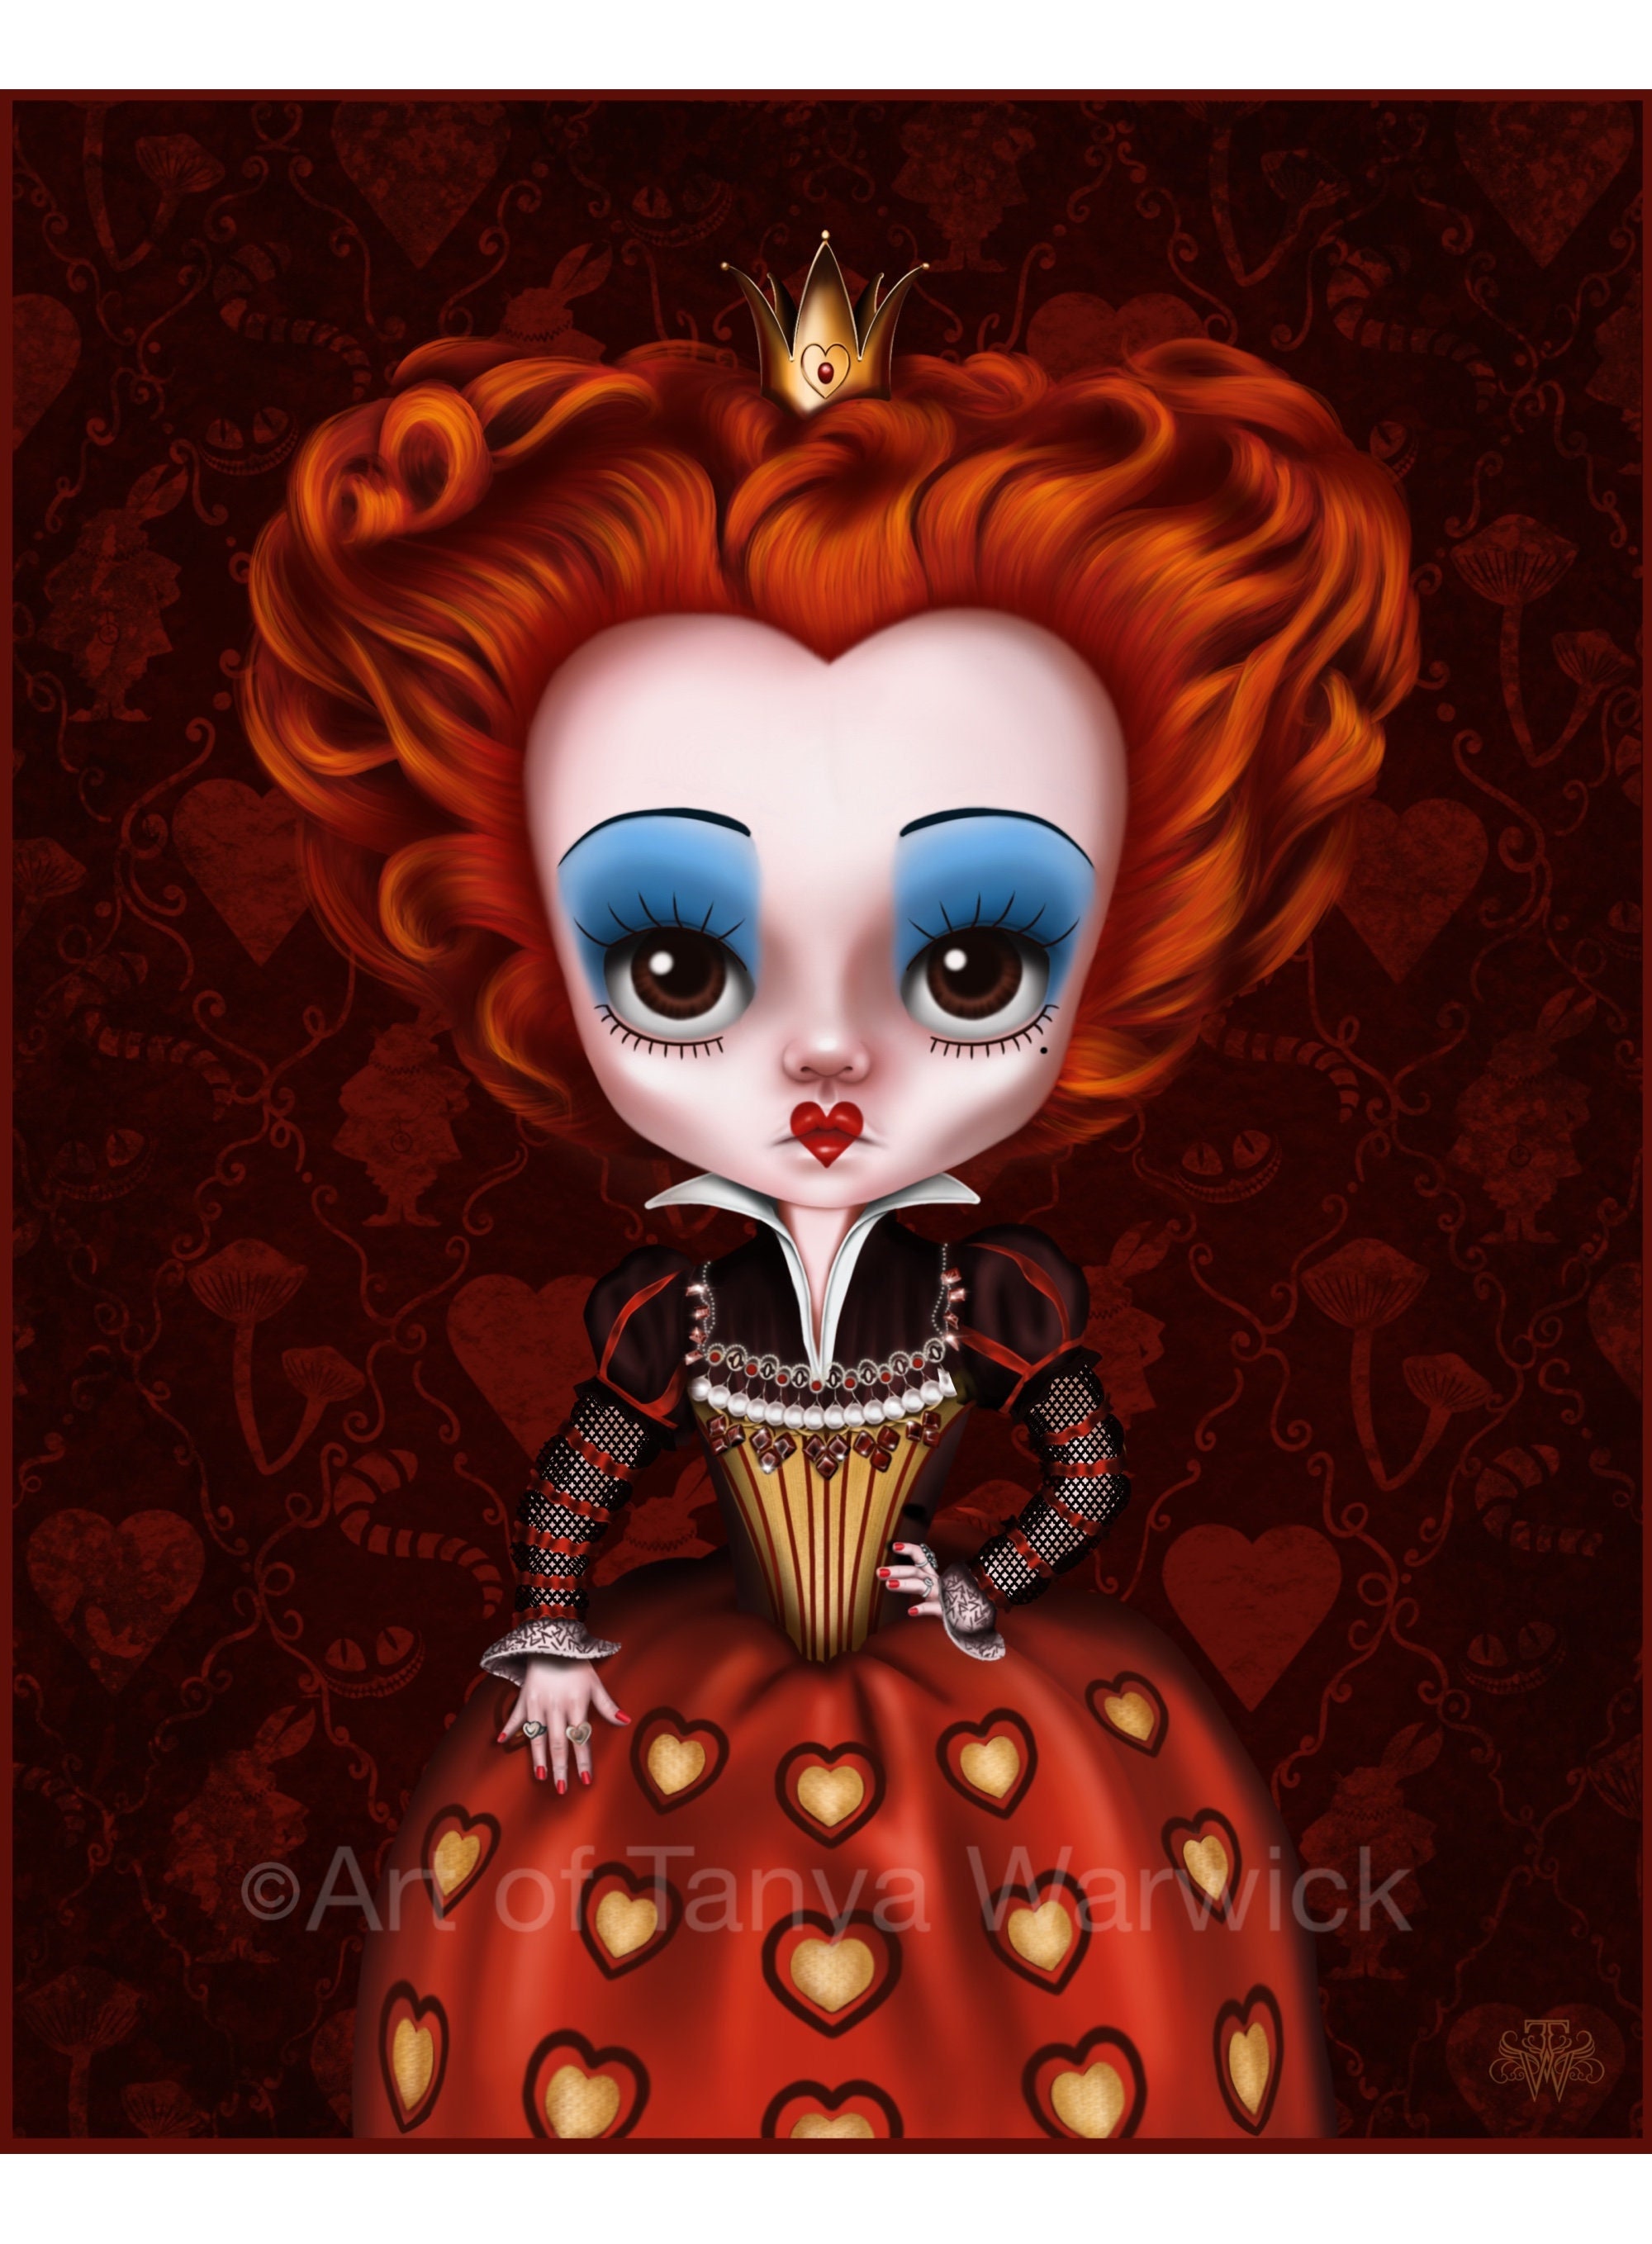 Apparatet Neuropati udledning Tim Burton Fan Art Print Red Queen of Hearts Gothic Decor - Etsy